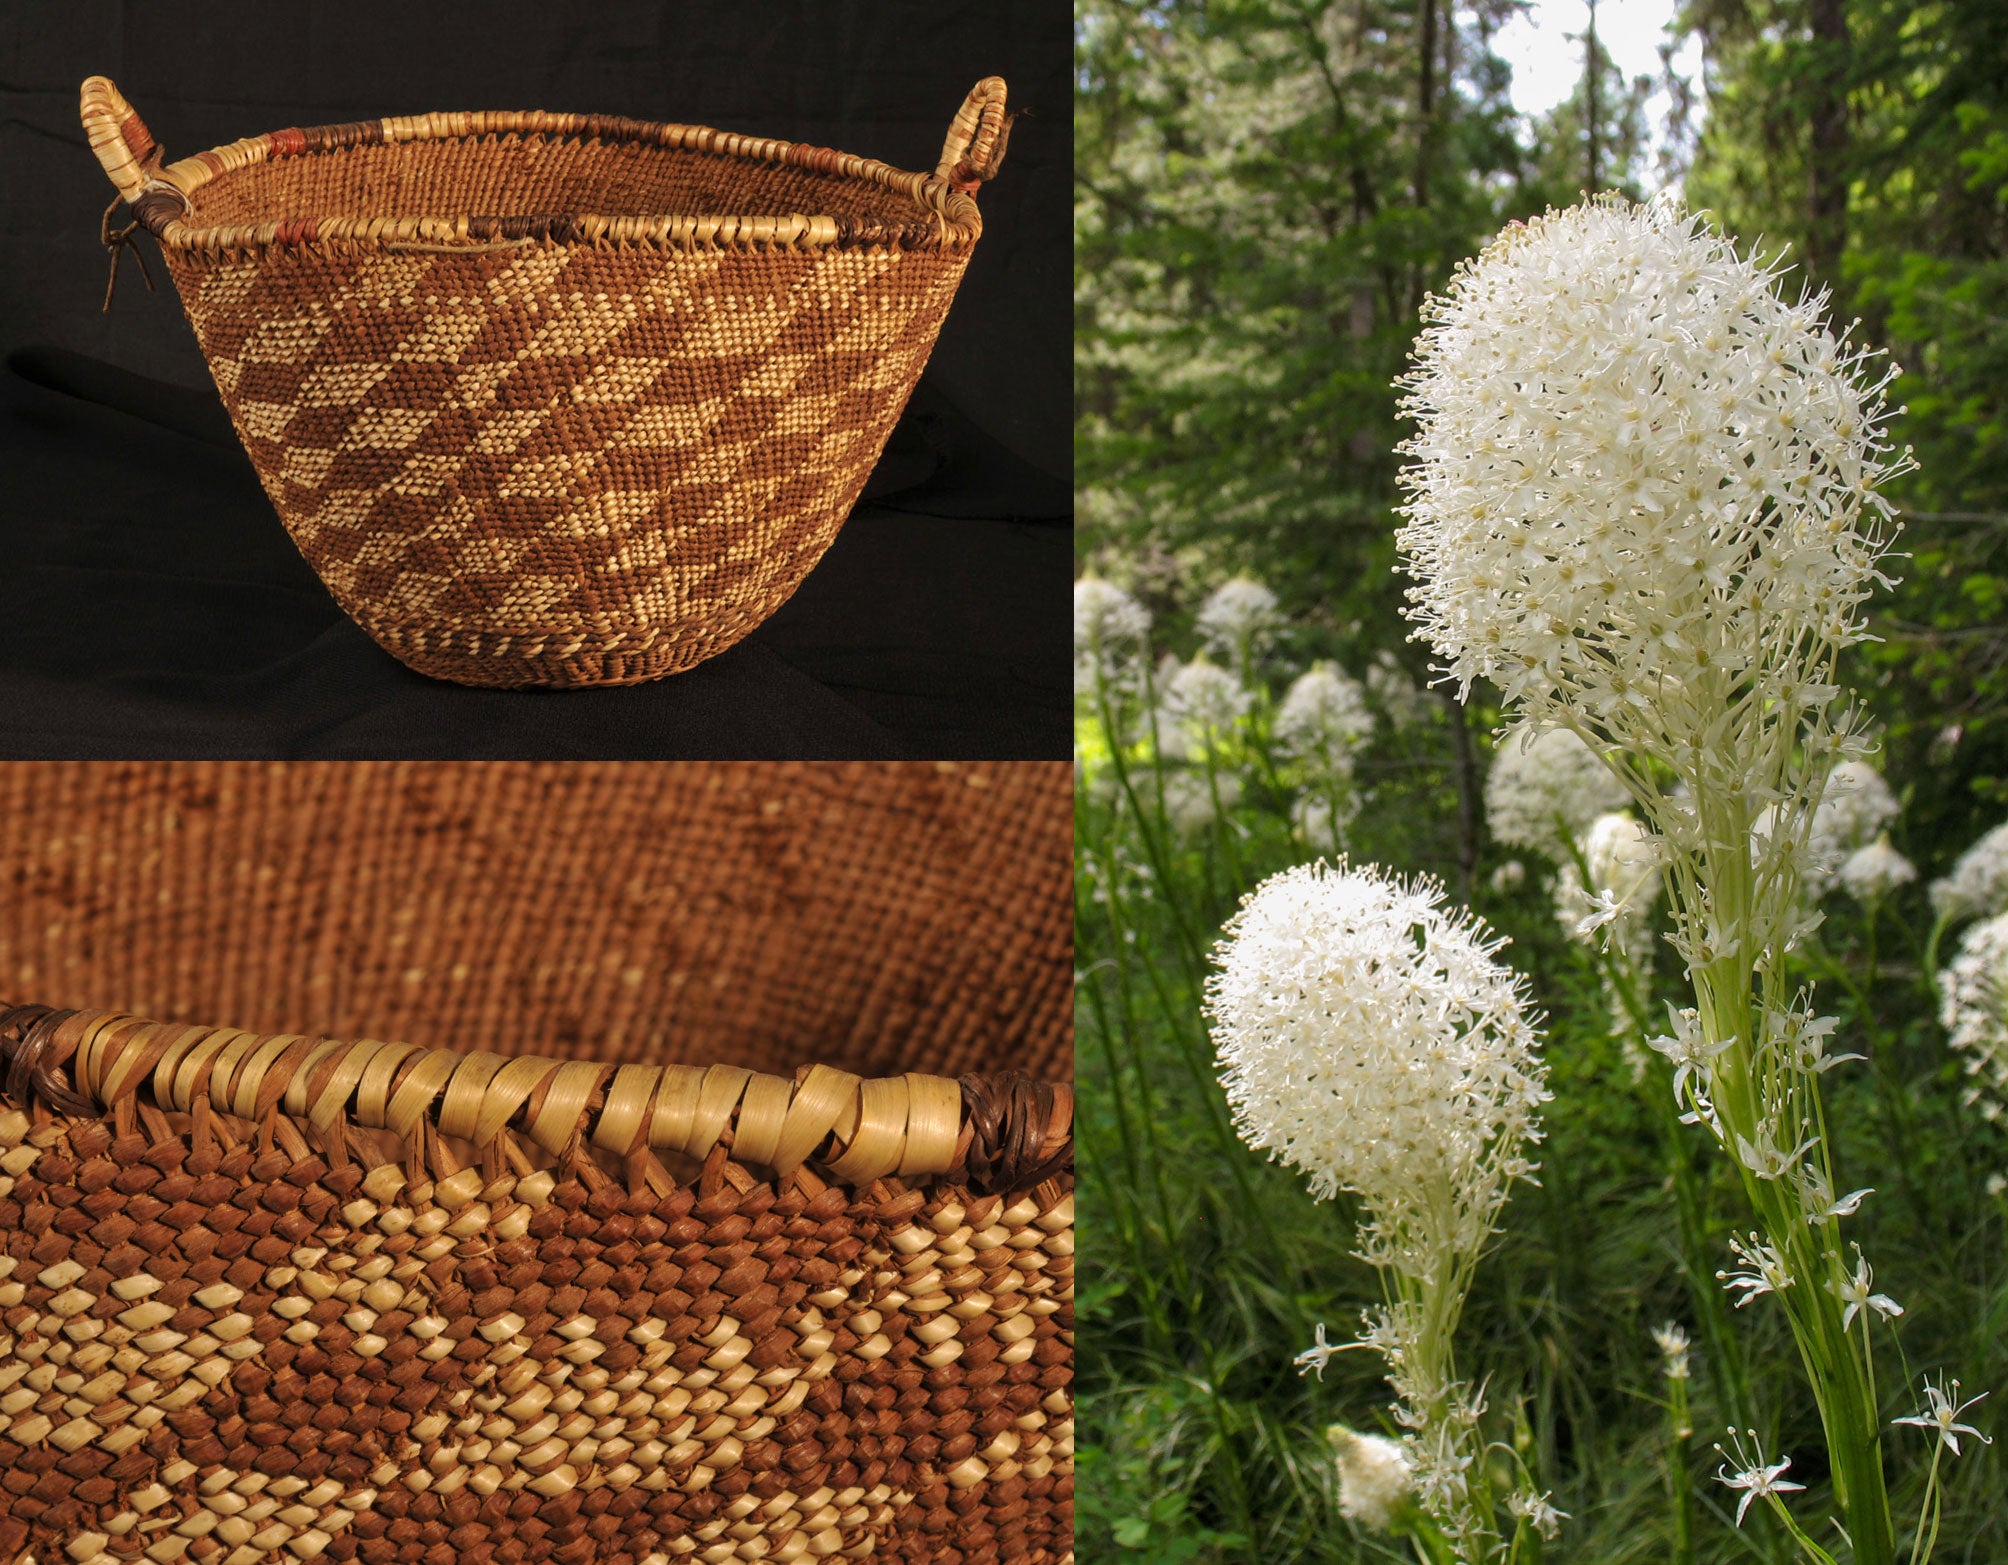 Photos of twined basket and bear grass.